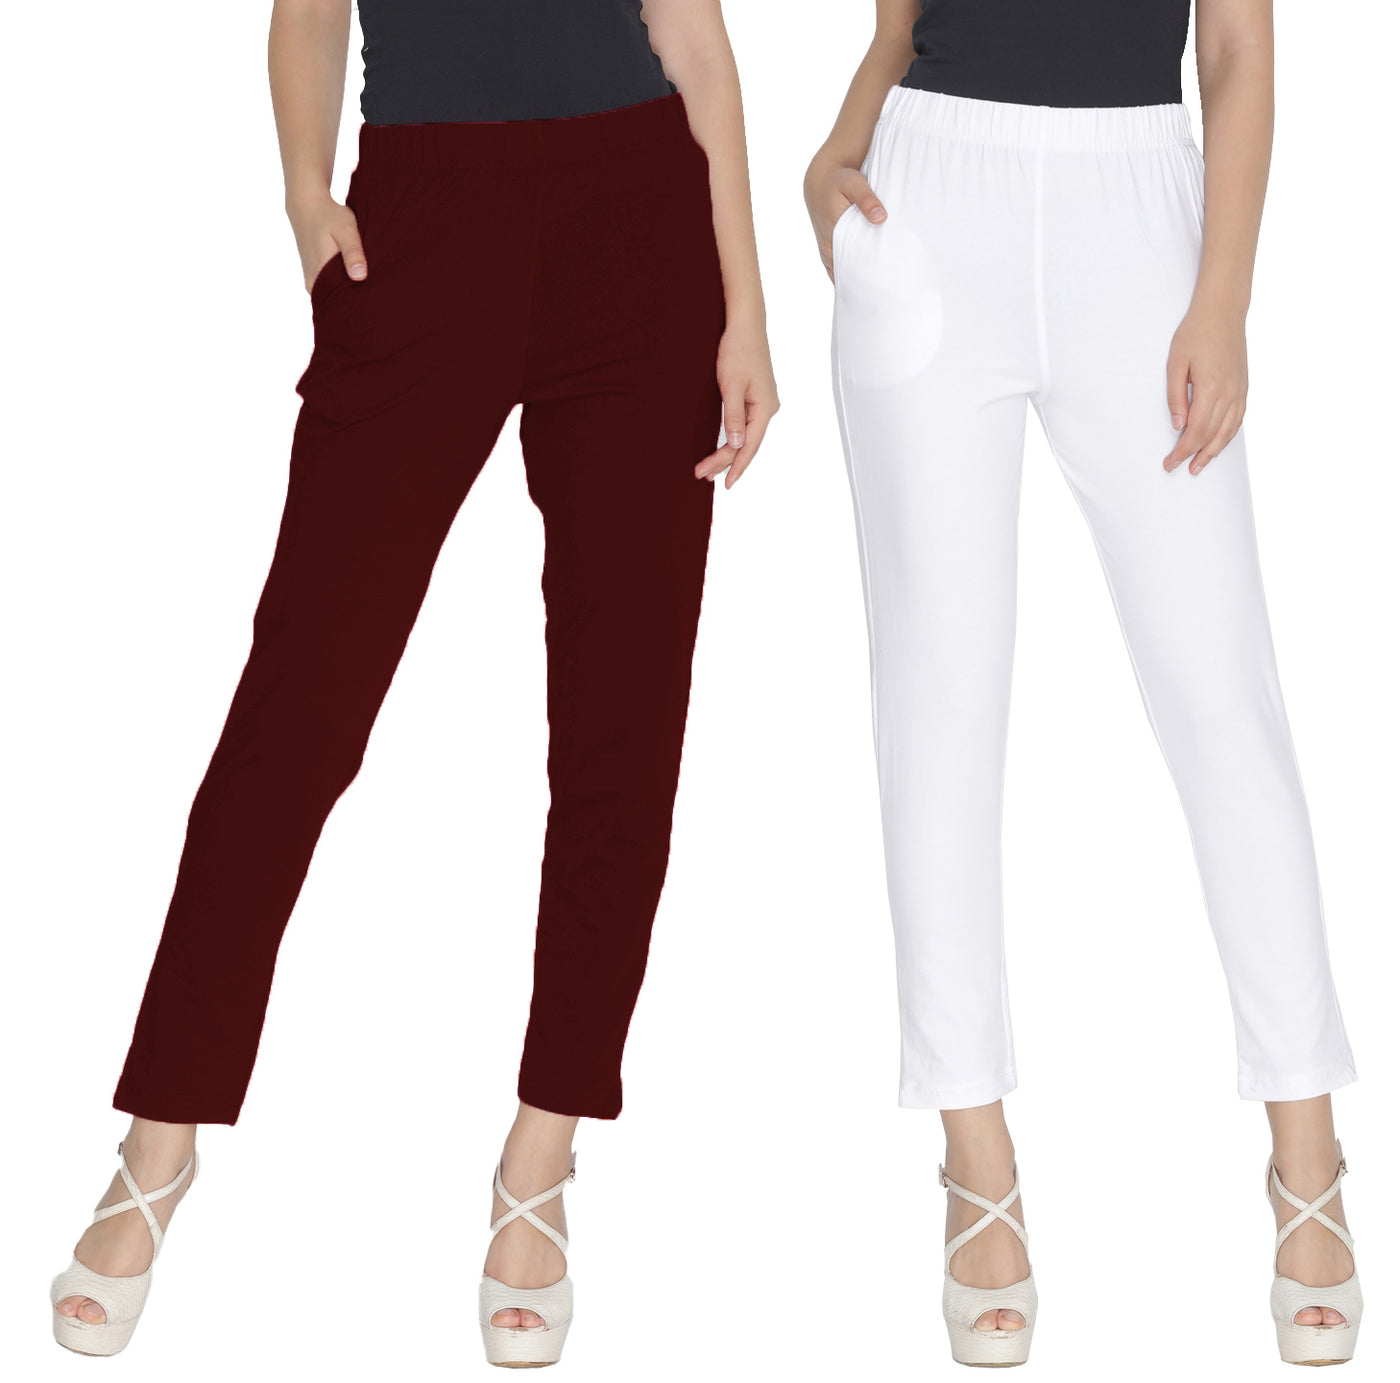 Maroon and White Kurti Pant - Pack of 2